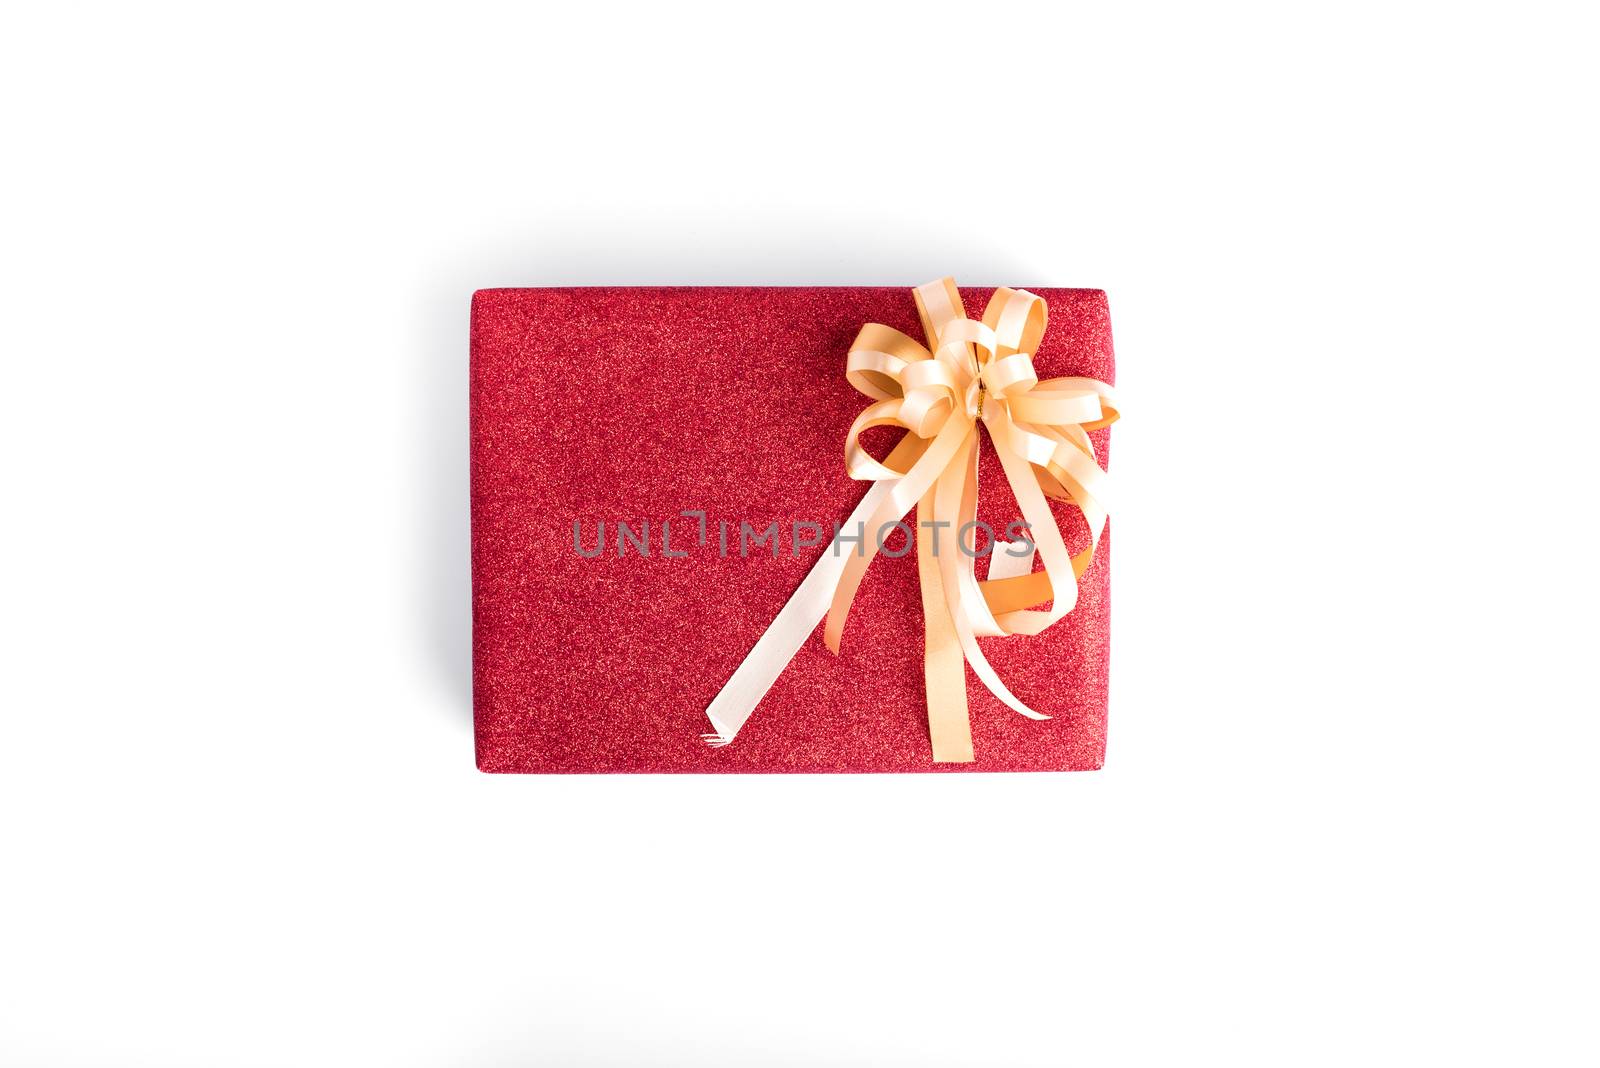 The Christmas present with red glitter gift wrapping and gold ri by animagesdesign